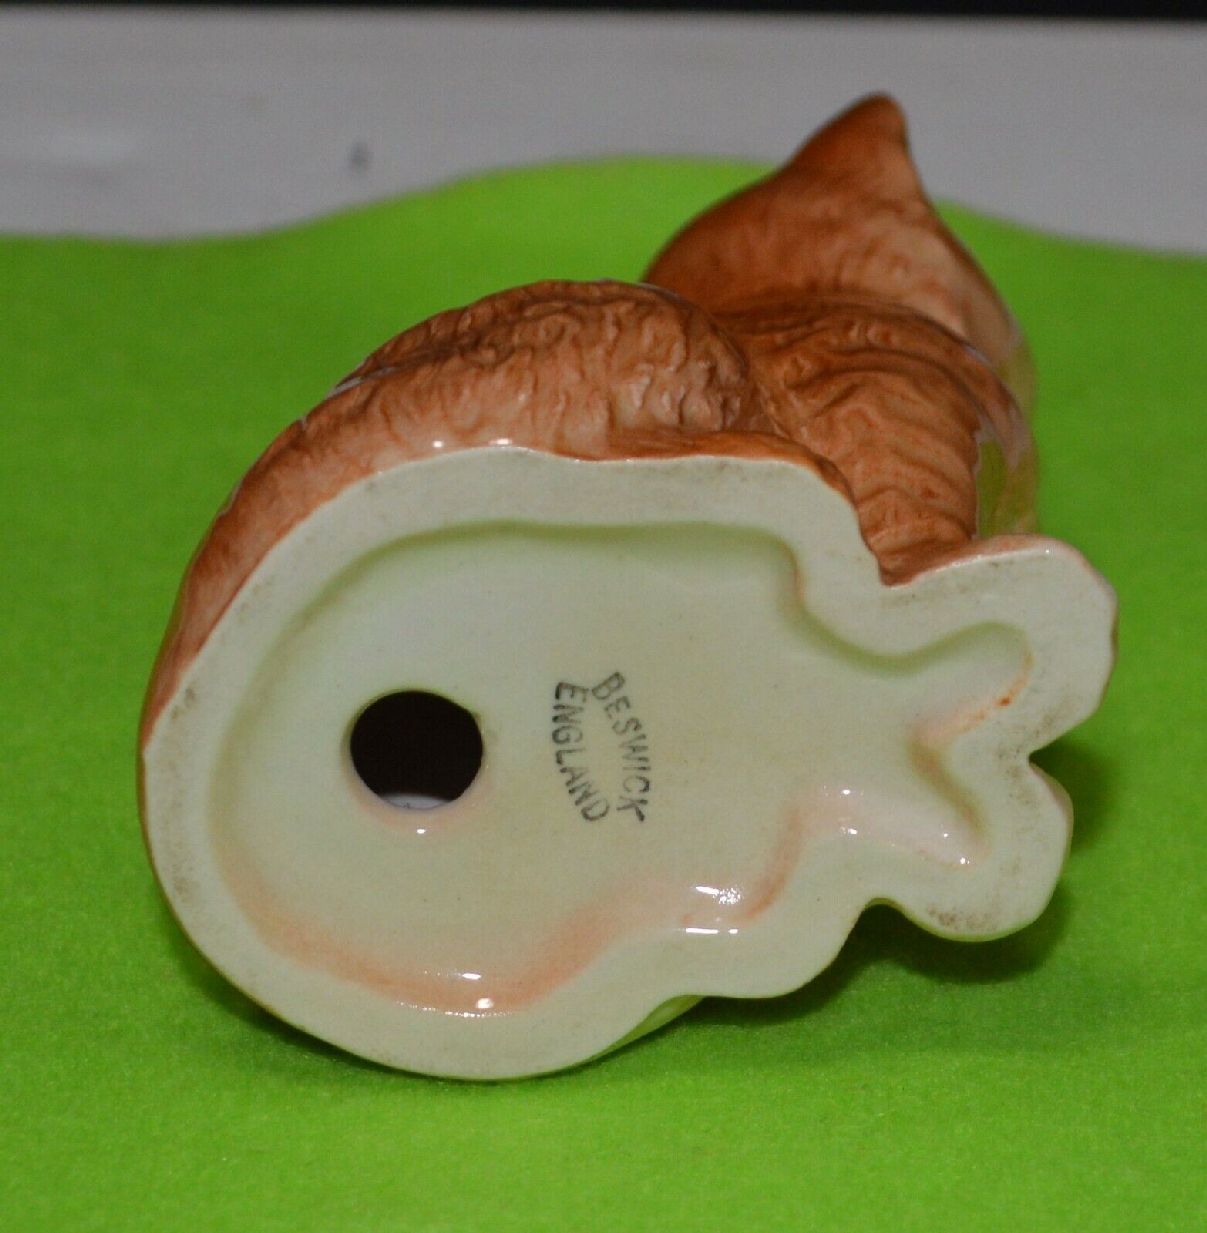 The model is 1886 and there is a printed "Beswick England" on the underside.